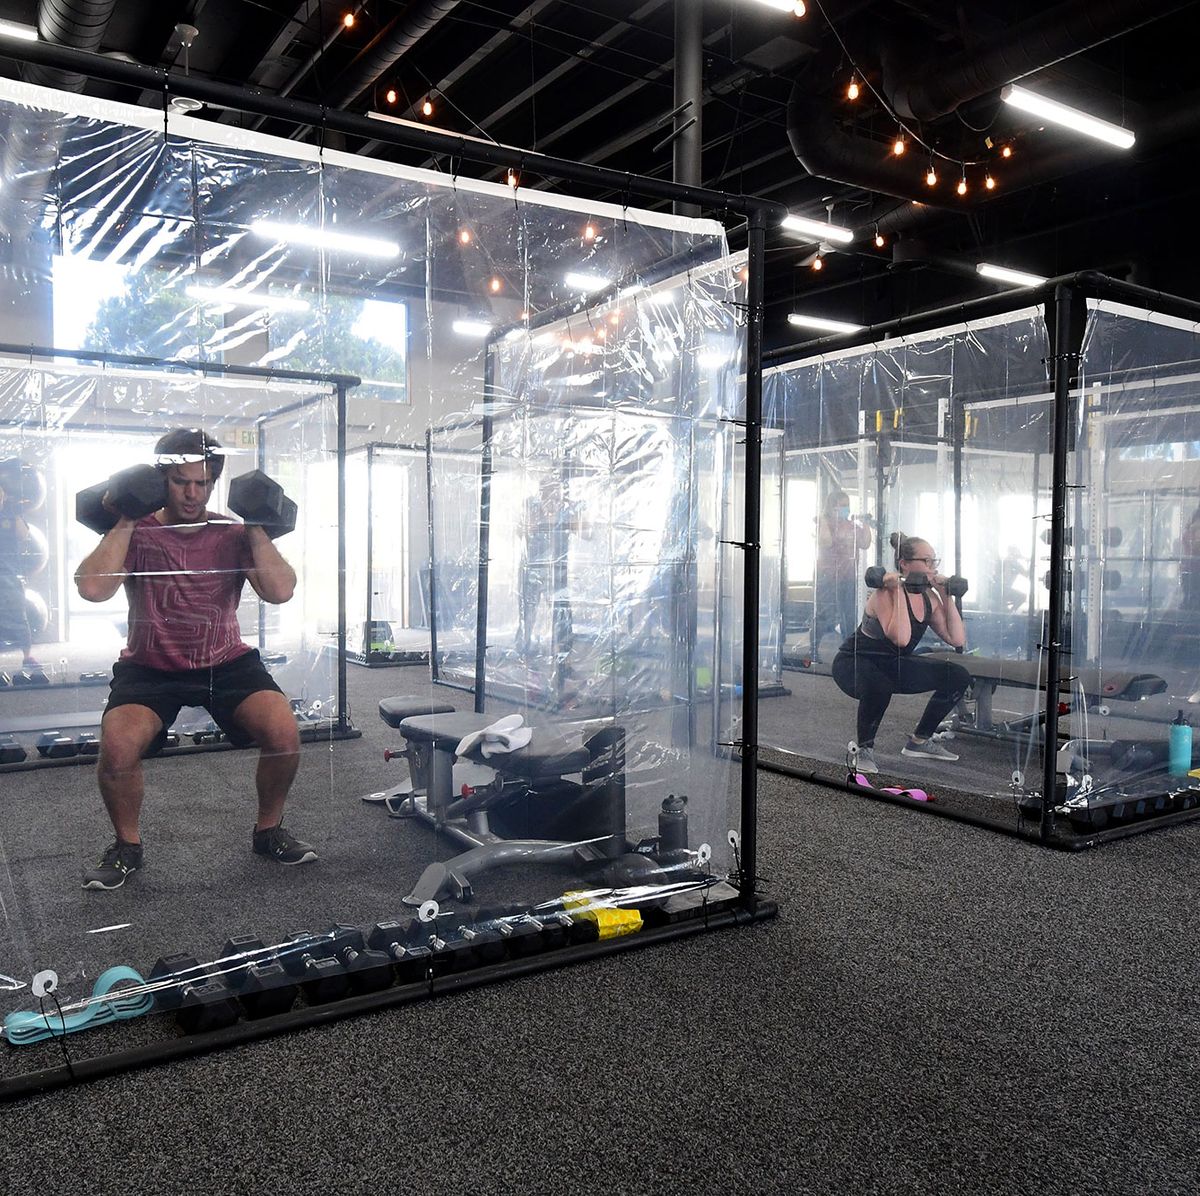 A US gym has reopened with individual pods for social distancing